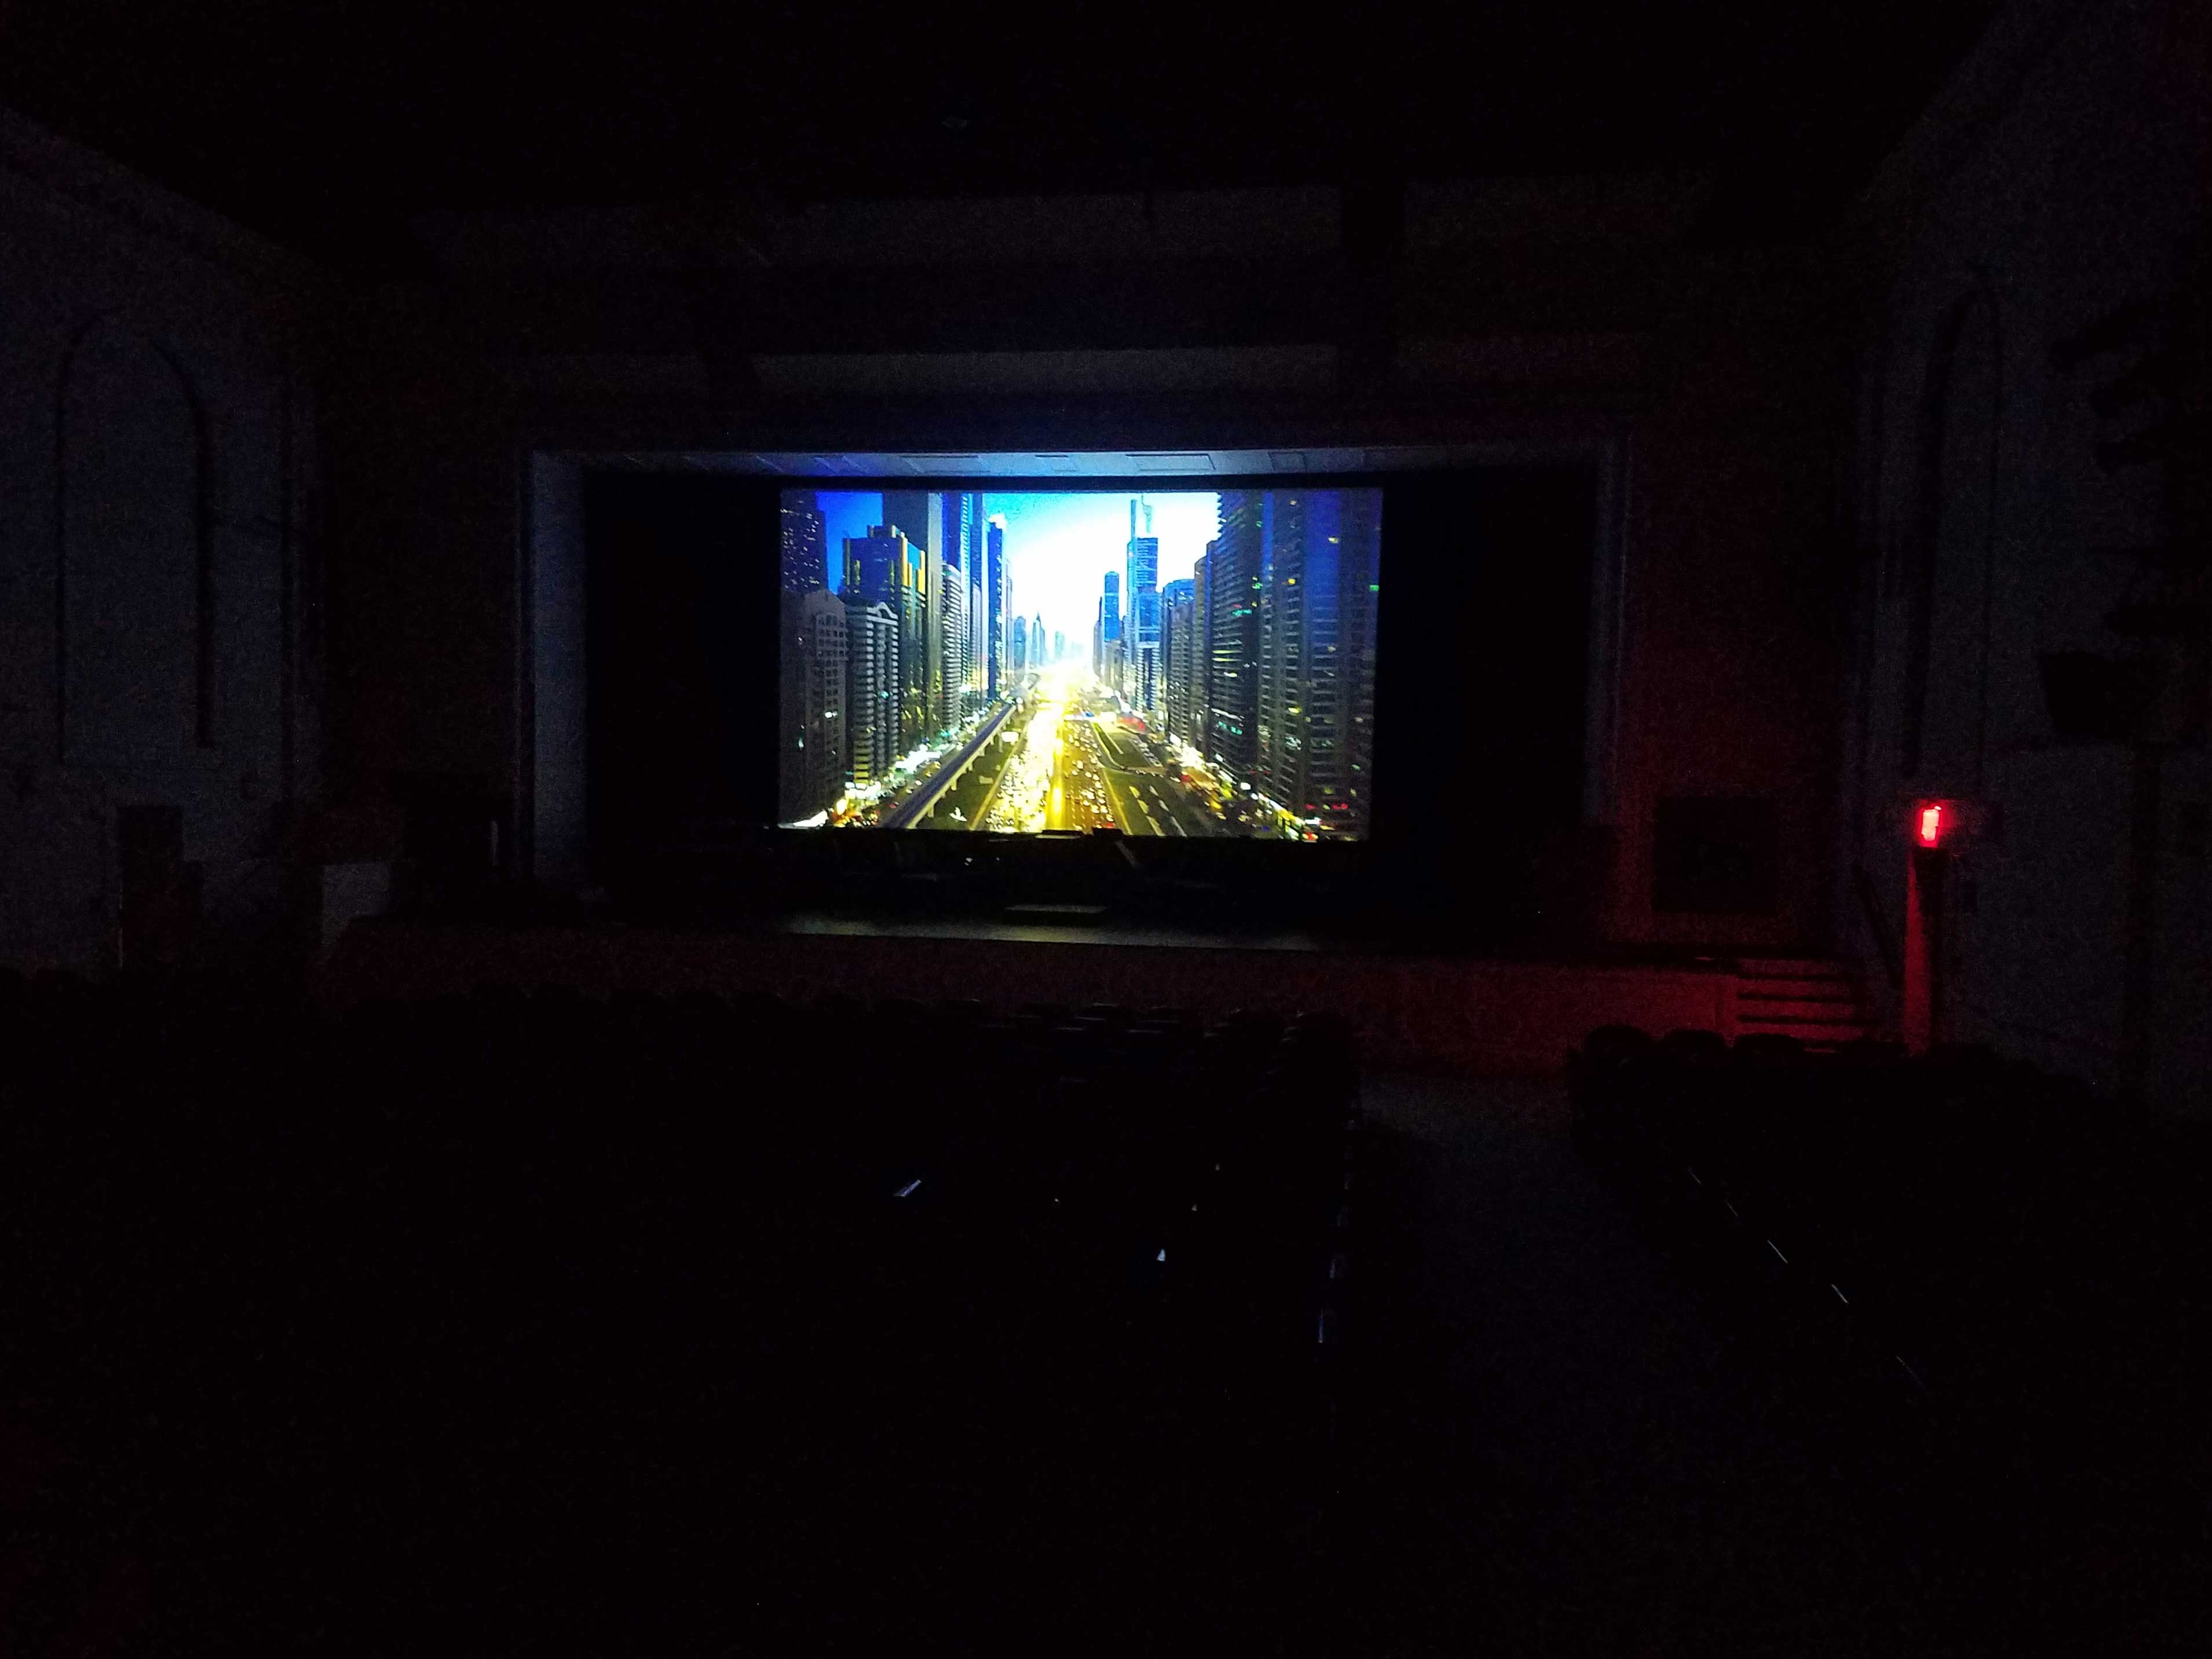 Projector allows theater to show movies